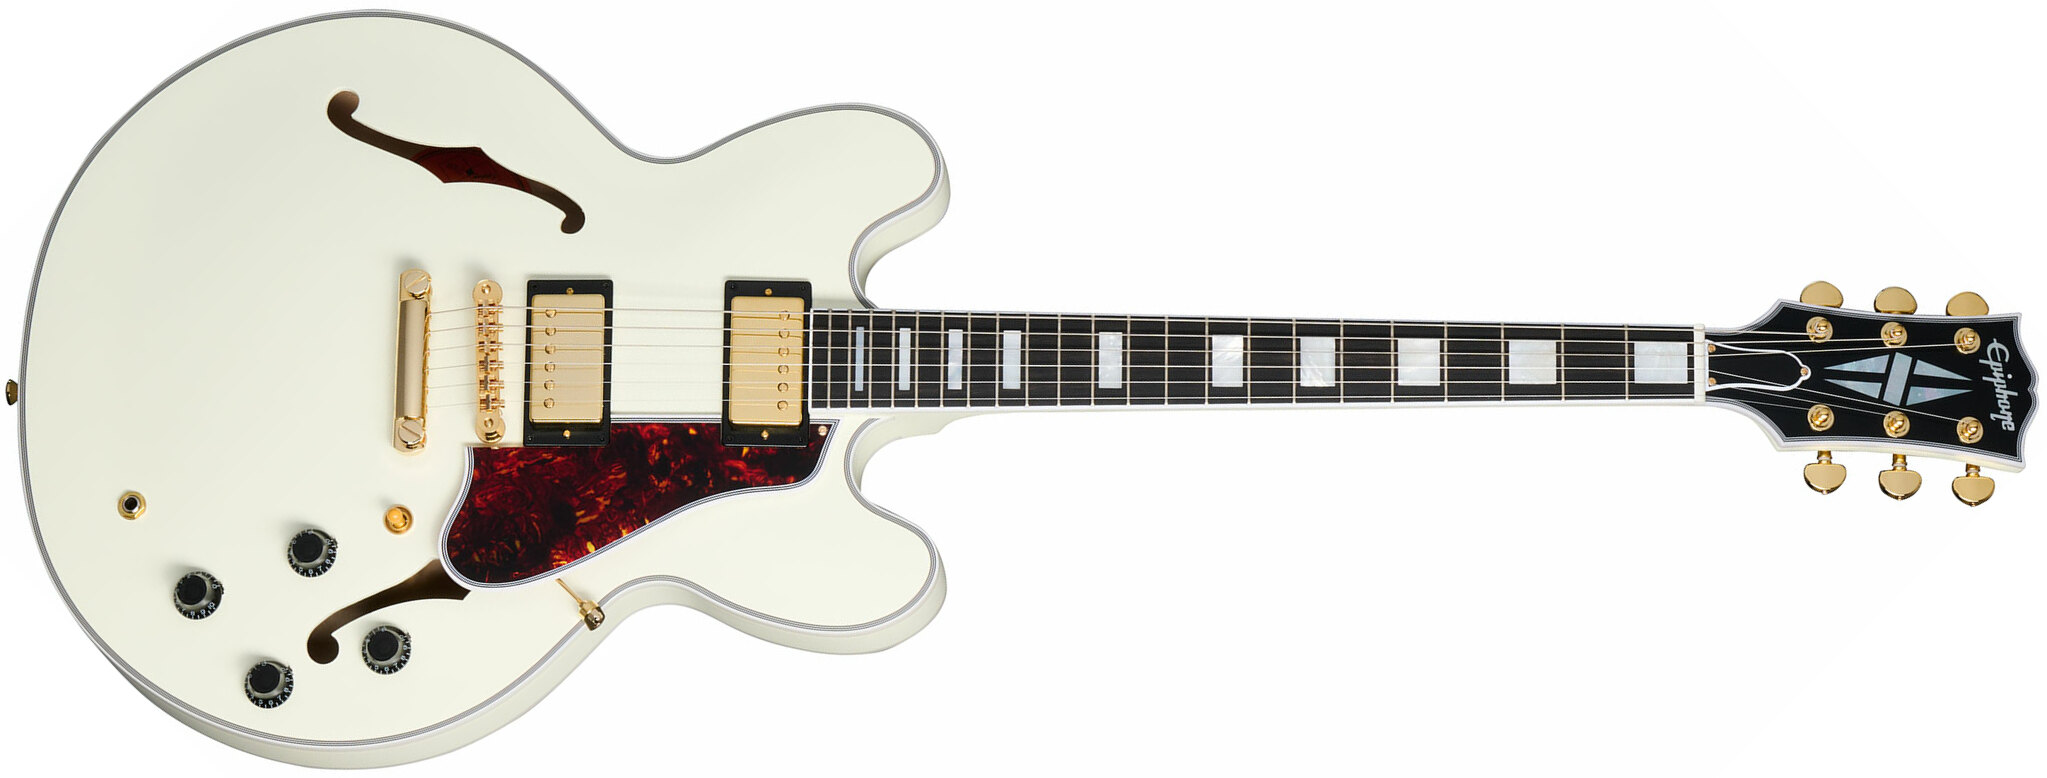 Epiphone Es355 1959 Inspired By 2h Gibson Ht Eb - Vos Classic White - Guitarra eléctrica semi caja - Main picture